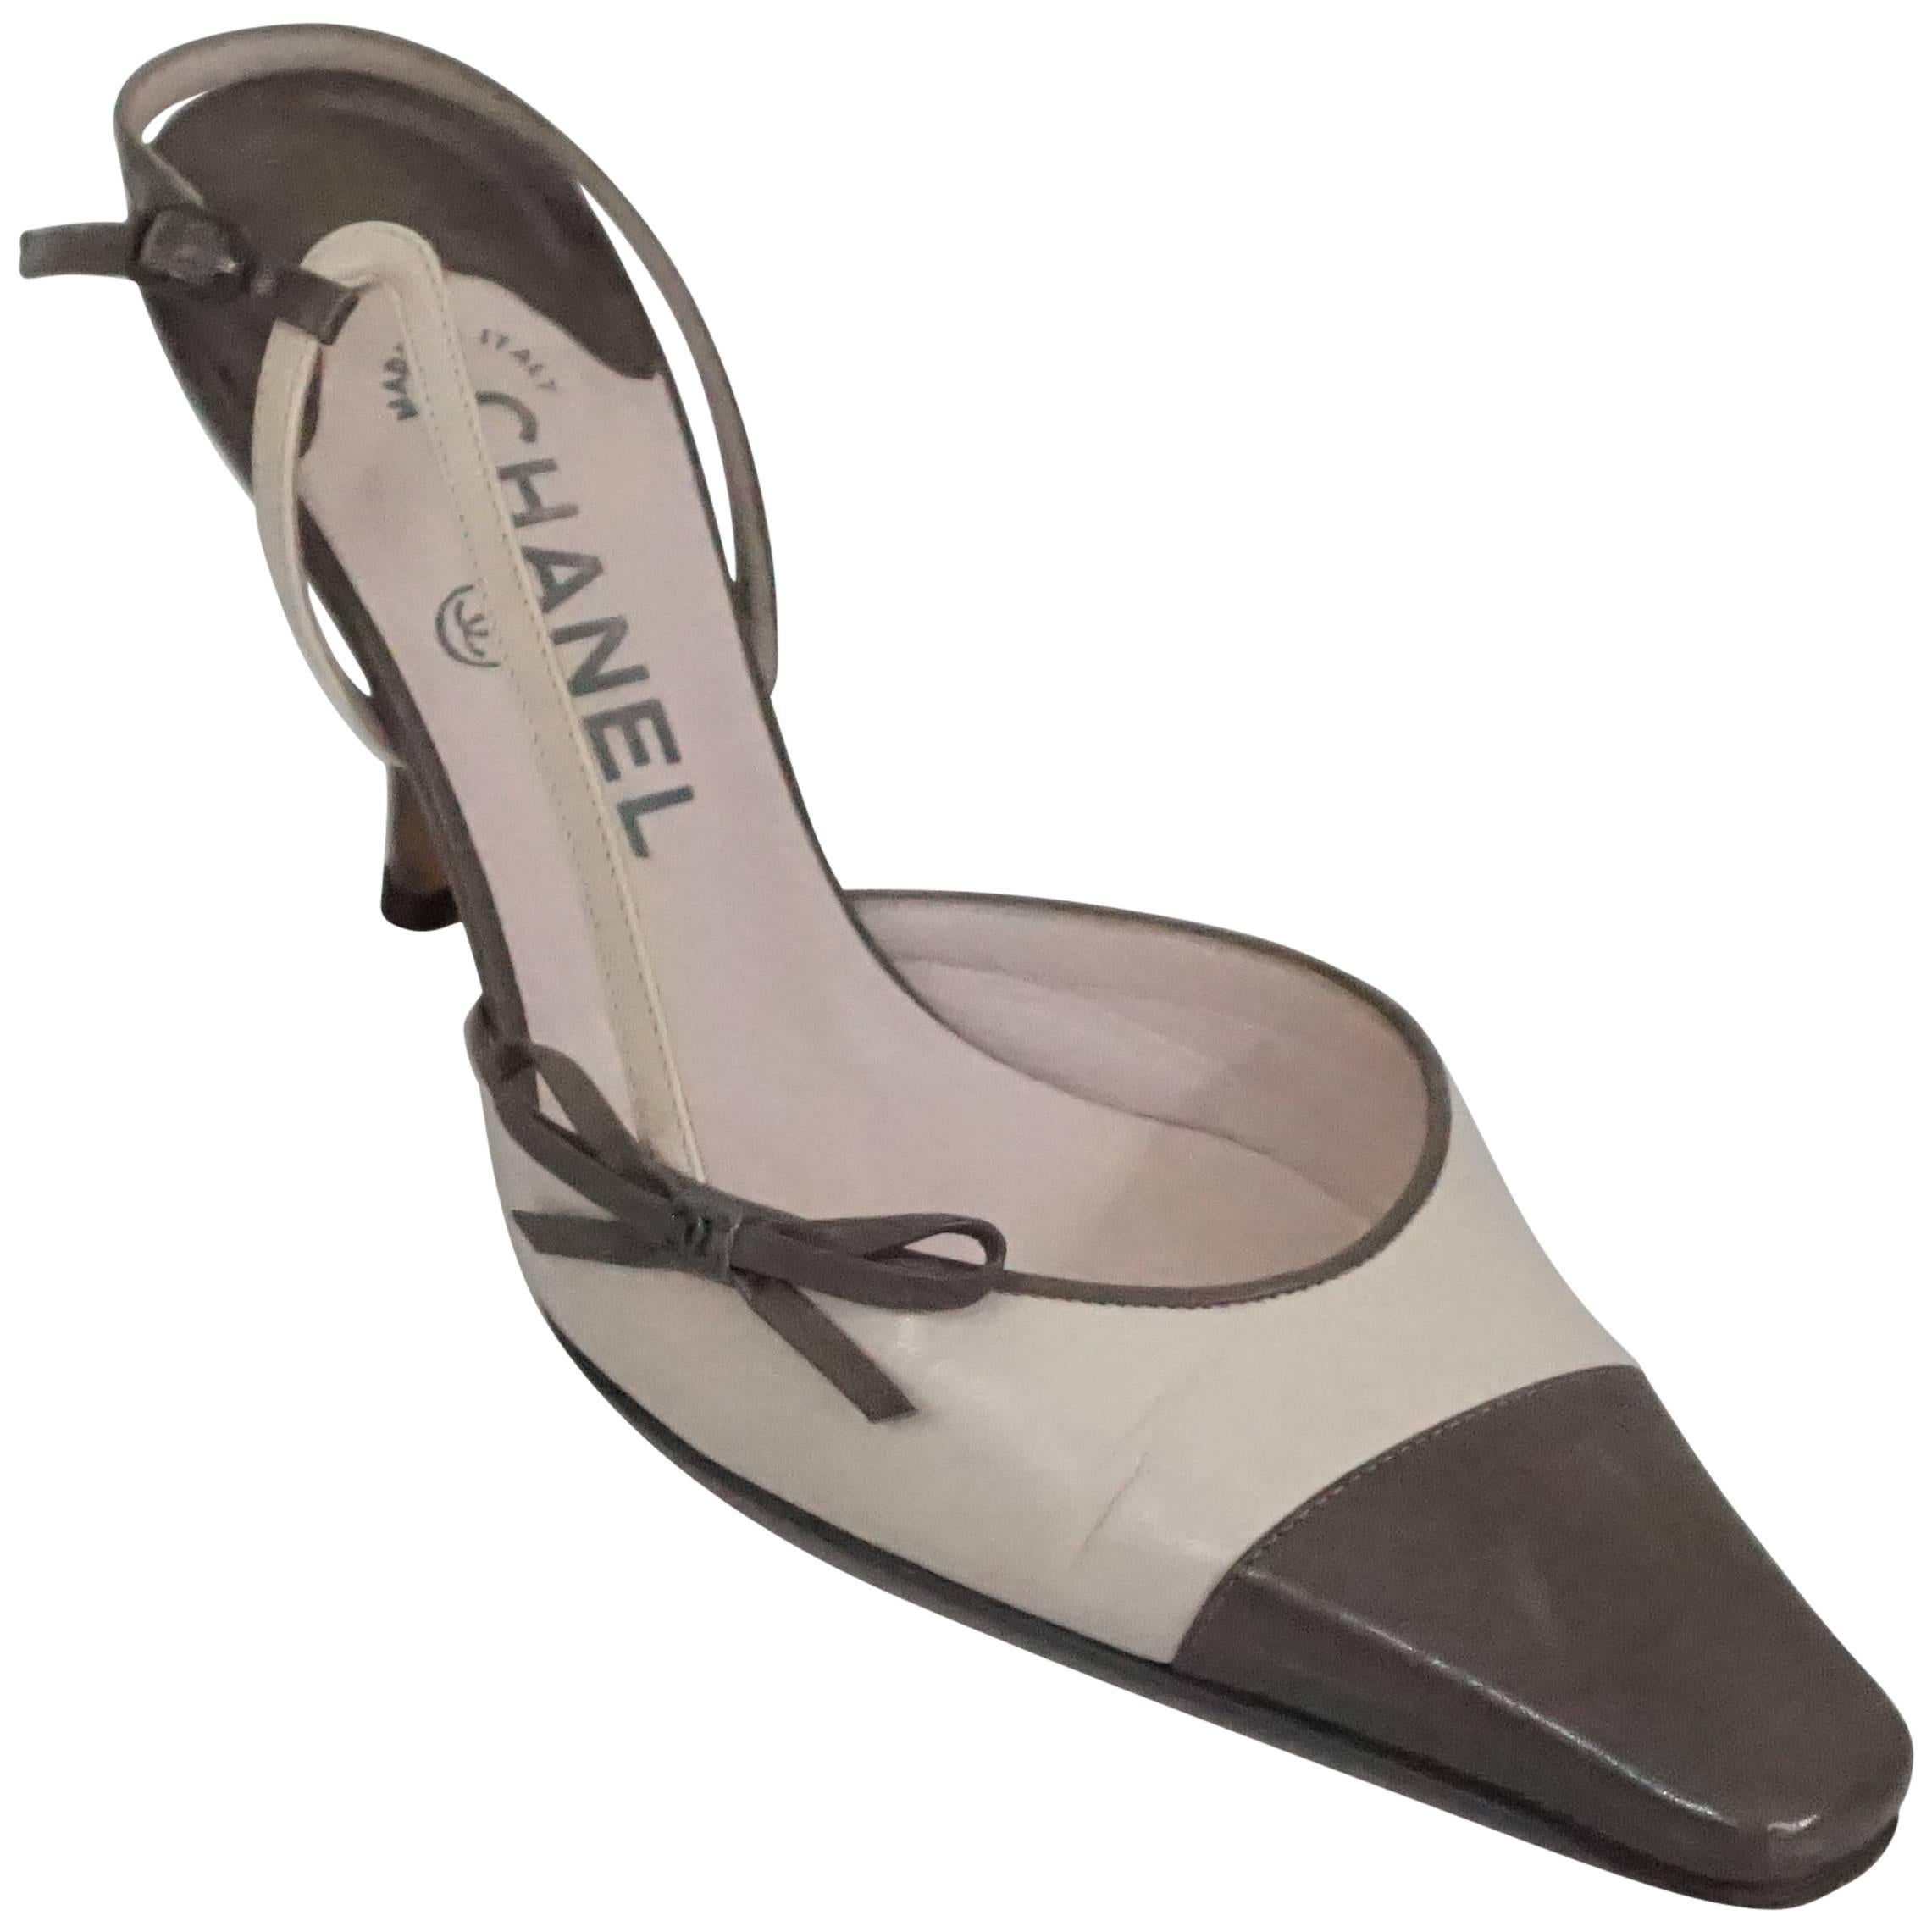 Chanel Creme and Taupe Slingback Heels - 37.5